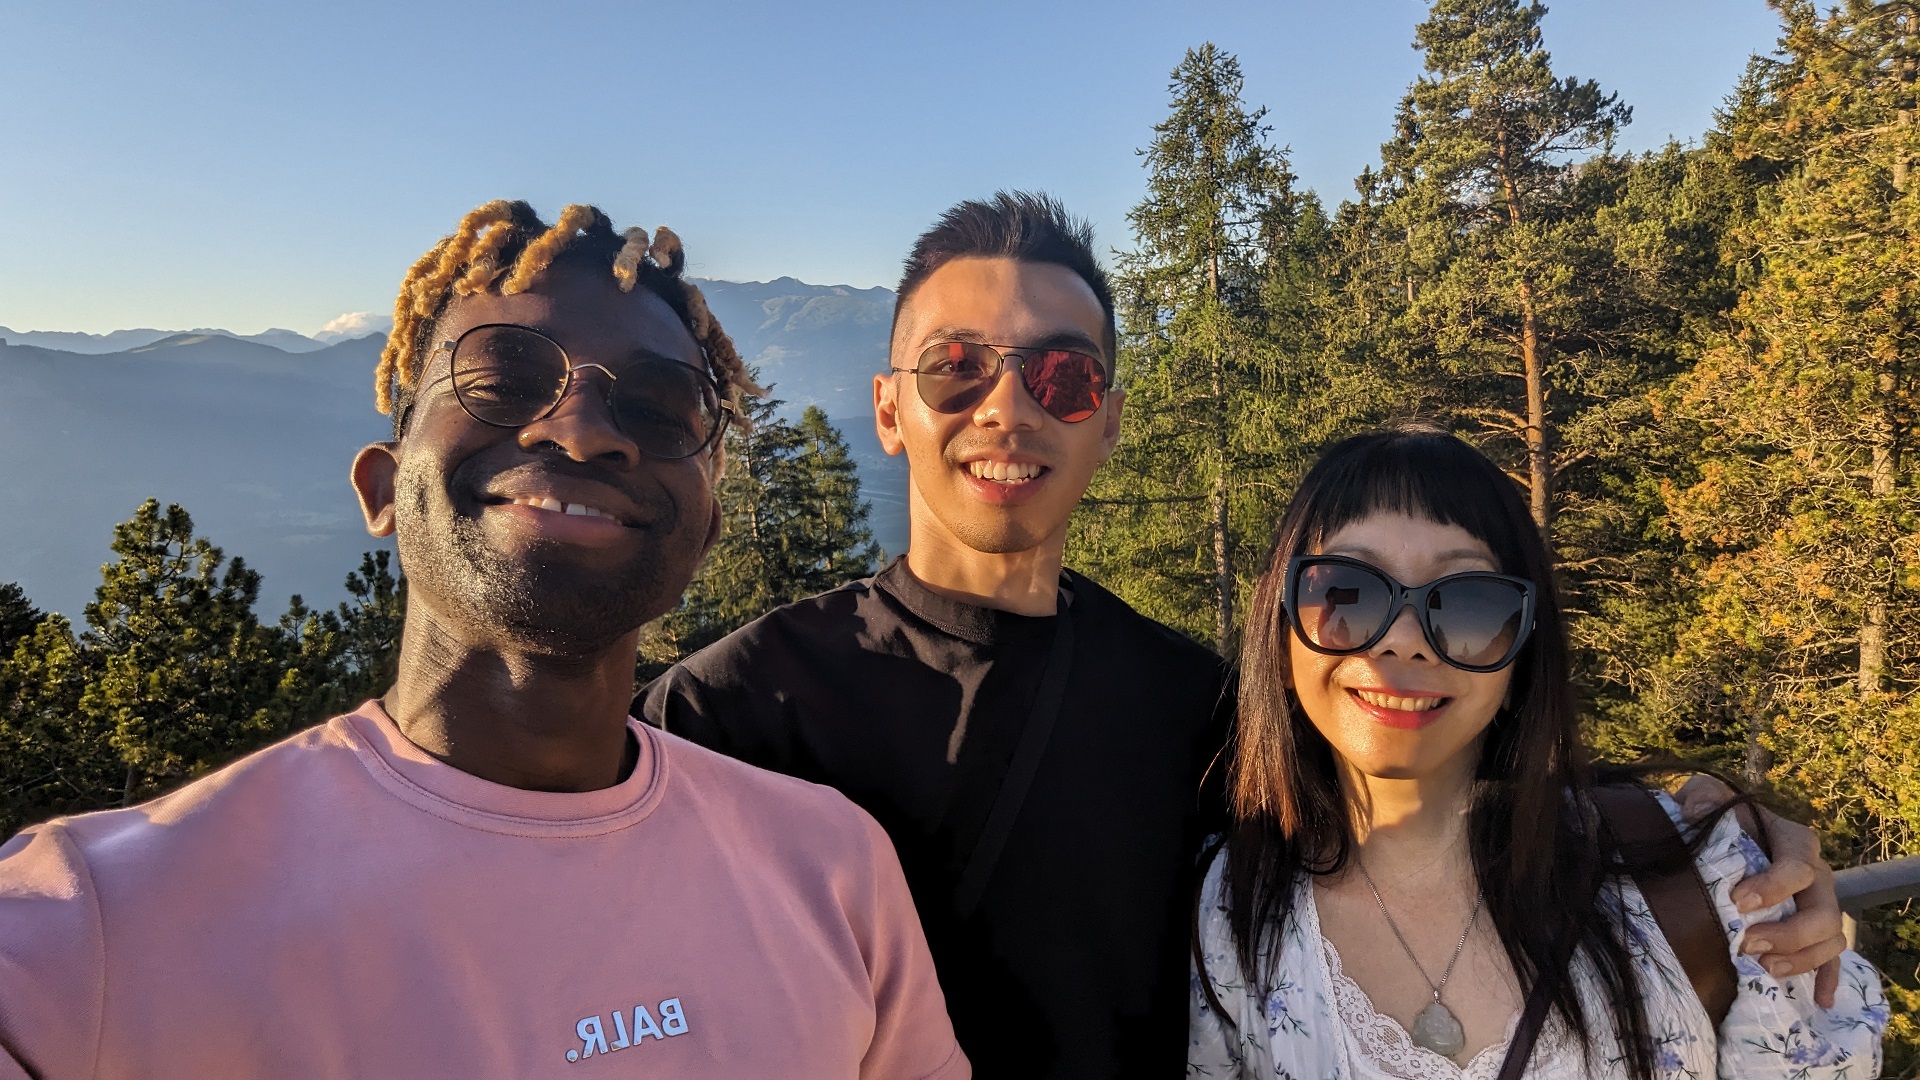 Adu and his boyfriend Michael and mother-in-law Winny up in the mountains in Liechtenstein